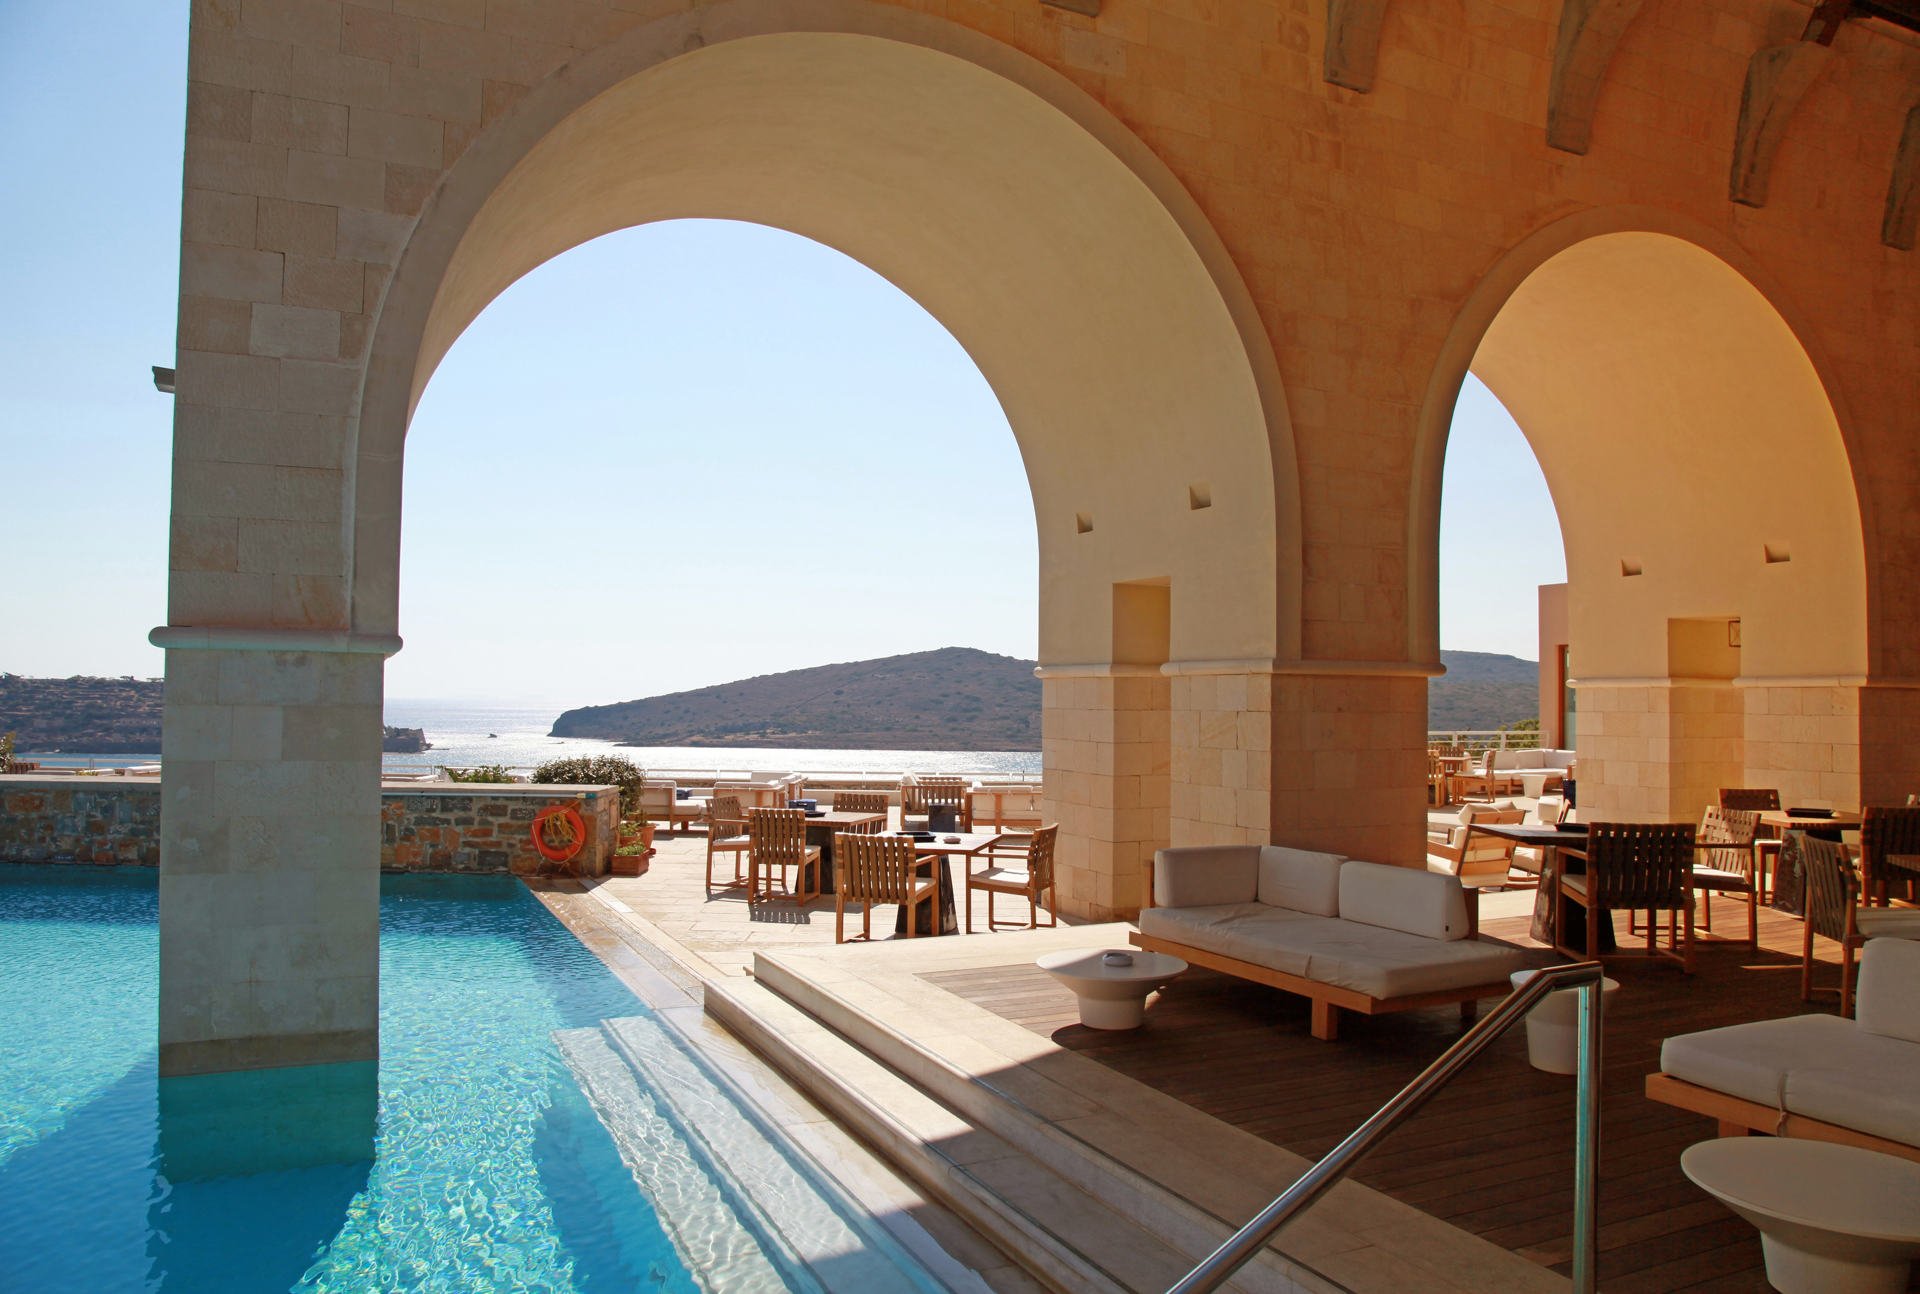 Beautiful Mediterranean sea view with arch pool terrace on summer luxury resort